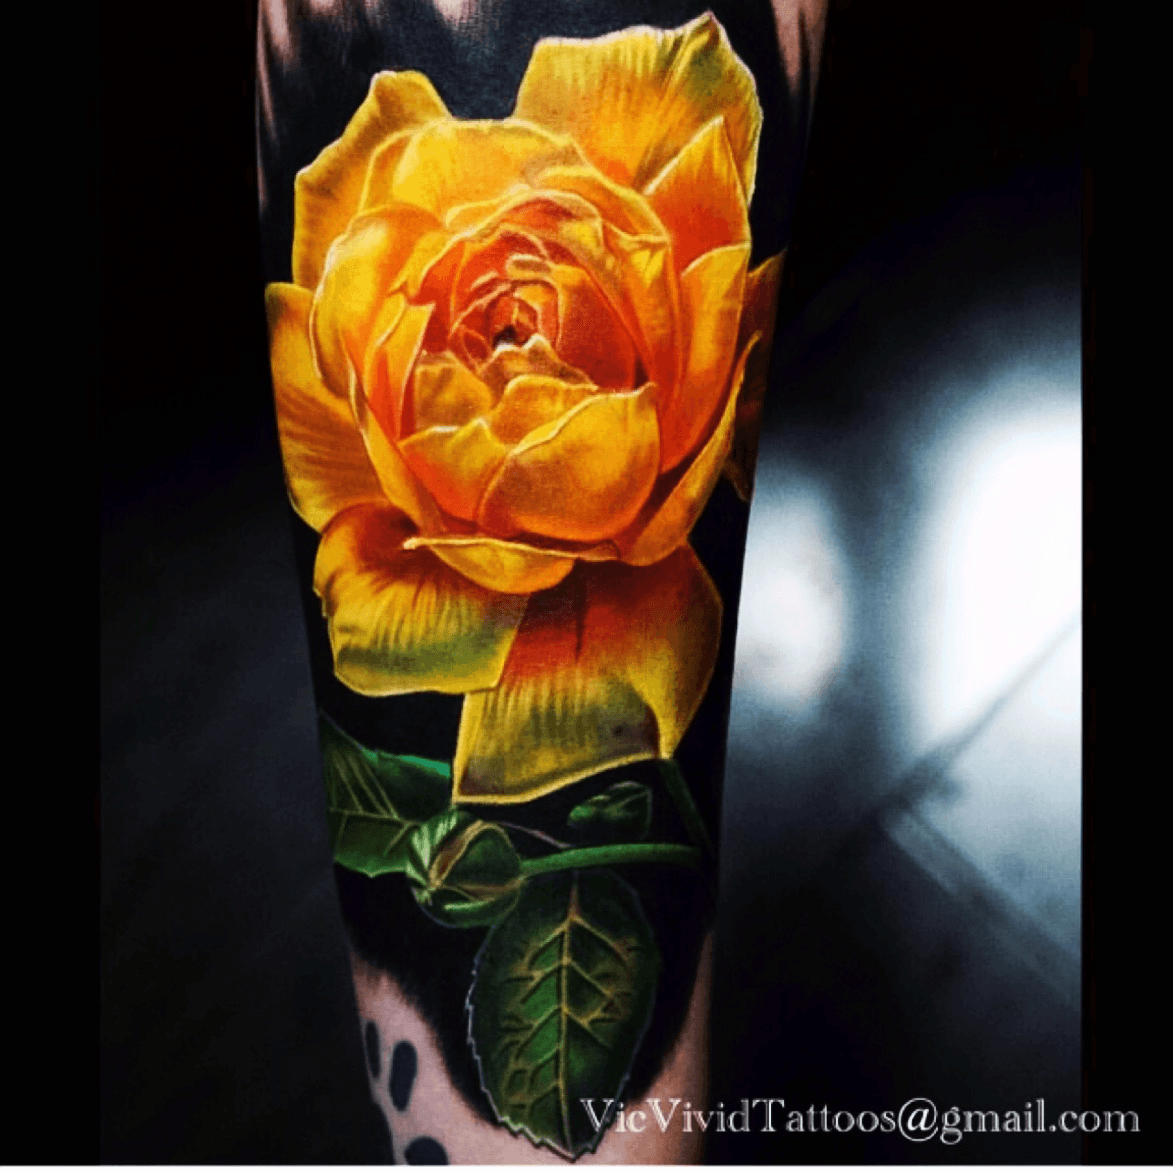 Shoulder Realistic Flower Tattoo by Inkd Chronicles